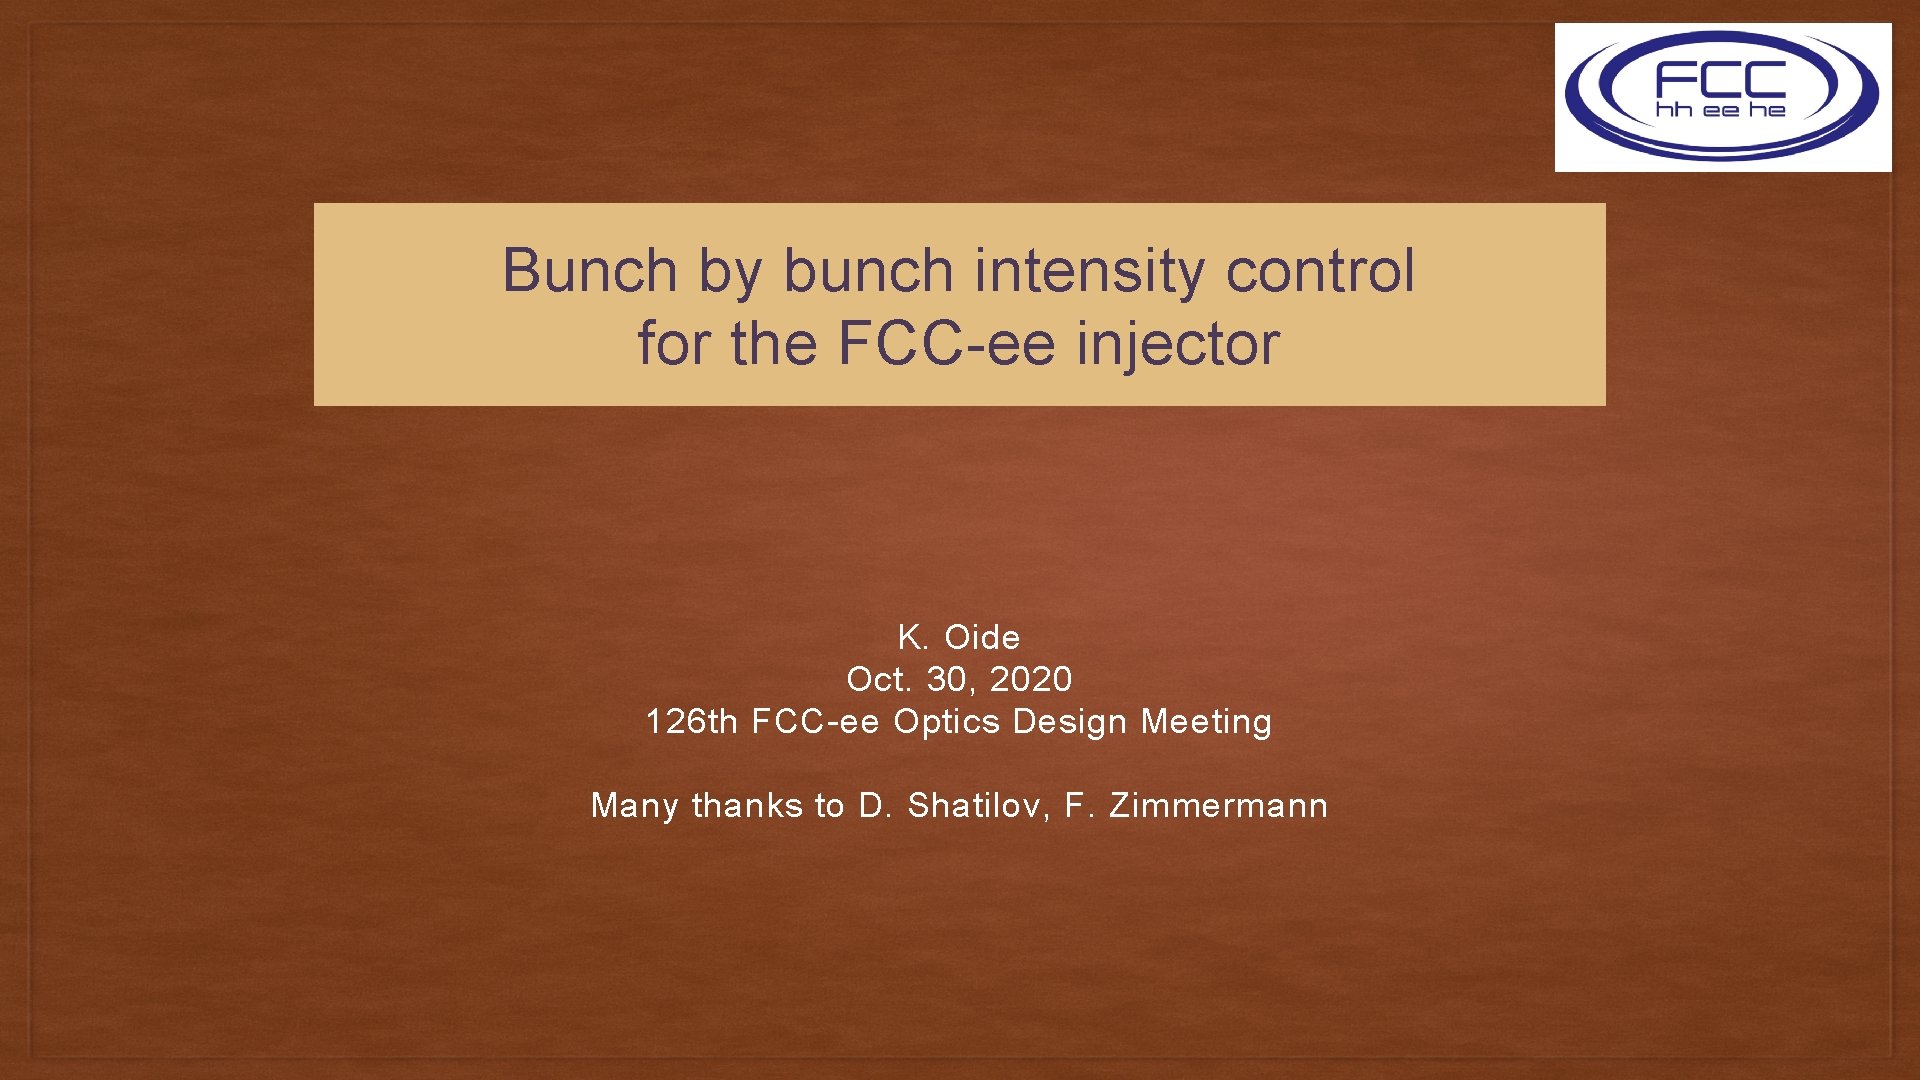 Bunch by bunch intensity control for the FCC-ee injector K. Oide Oct. 30, 2020